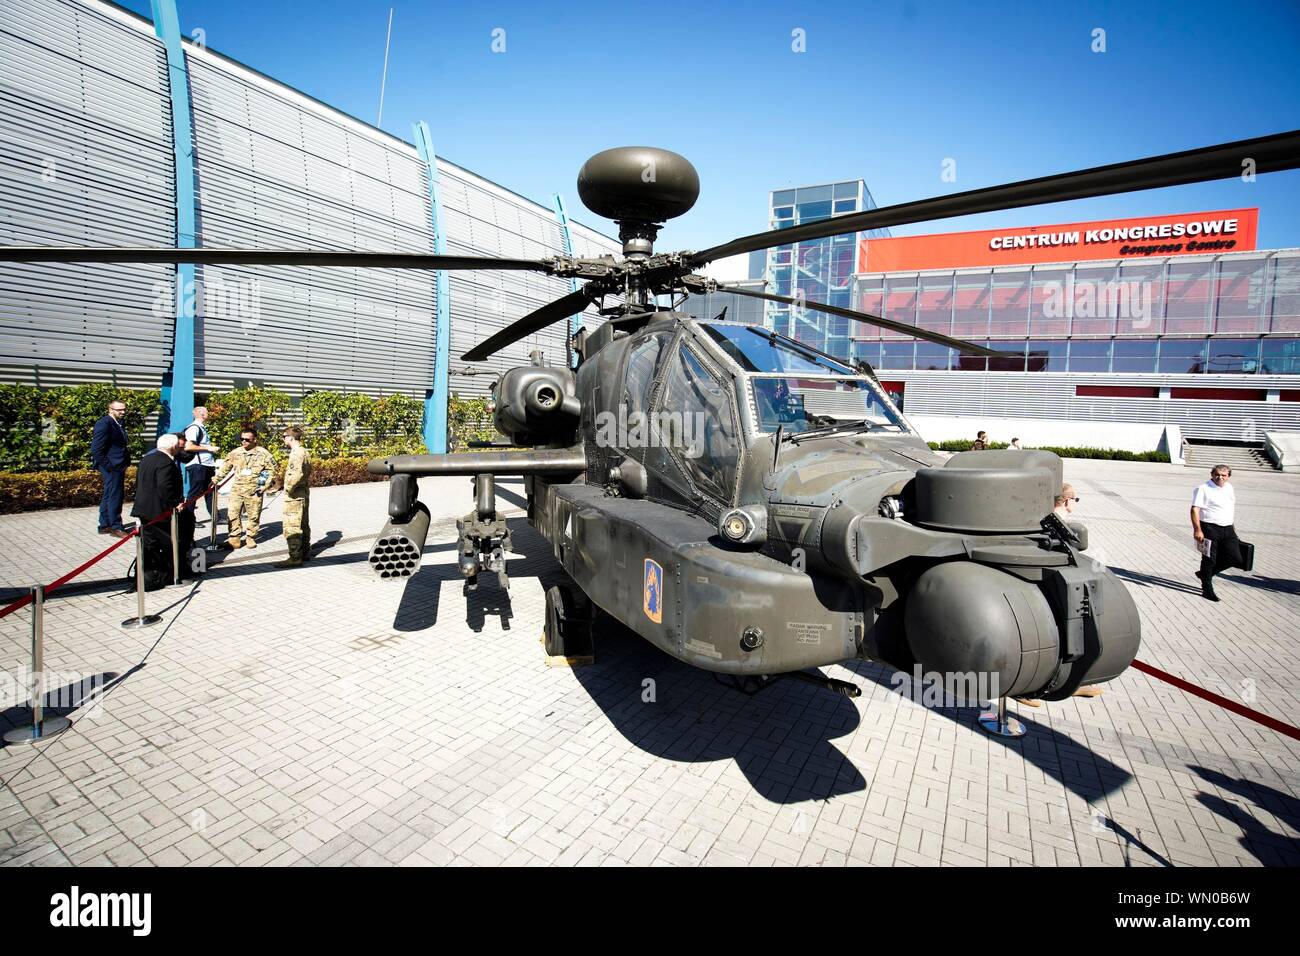 (190905) -- KIELCE (POLAND), Sept. 5, 2019 (Xinhua) -- An Apache helicopter is displayed at the 27th International Defence Industry Exhibition in Kielce, Poland, on Sept. 5, 2019. The 27th International Defence Industry Exhibition MSPO, one of the largest in Central and Eastern Europe with around 600 exhibitors, is held here from Sept. 3 to Sept. 6. (Photo by Jaap Arriens/Xinhua) Stock Photo